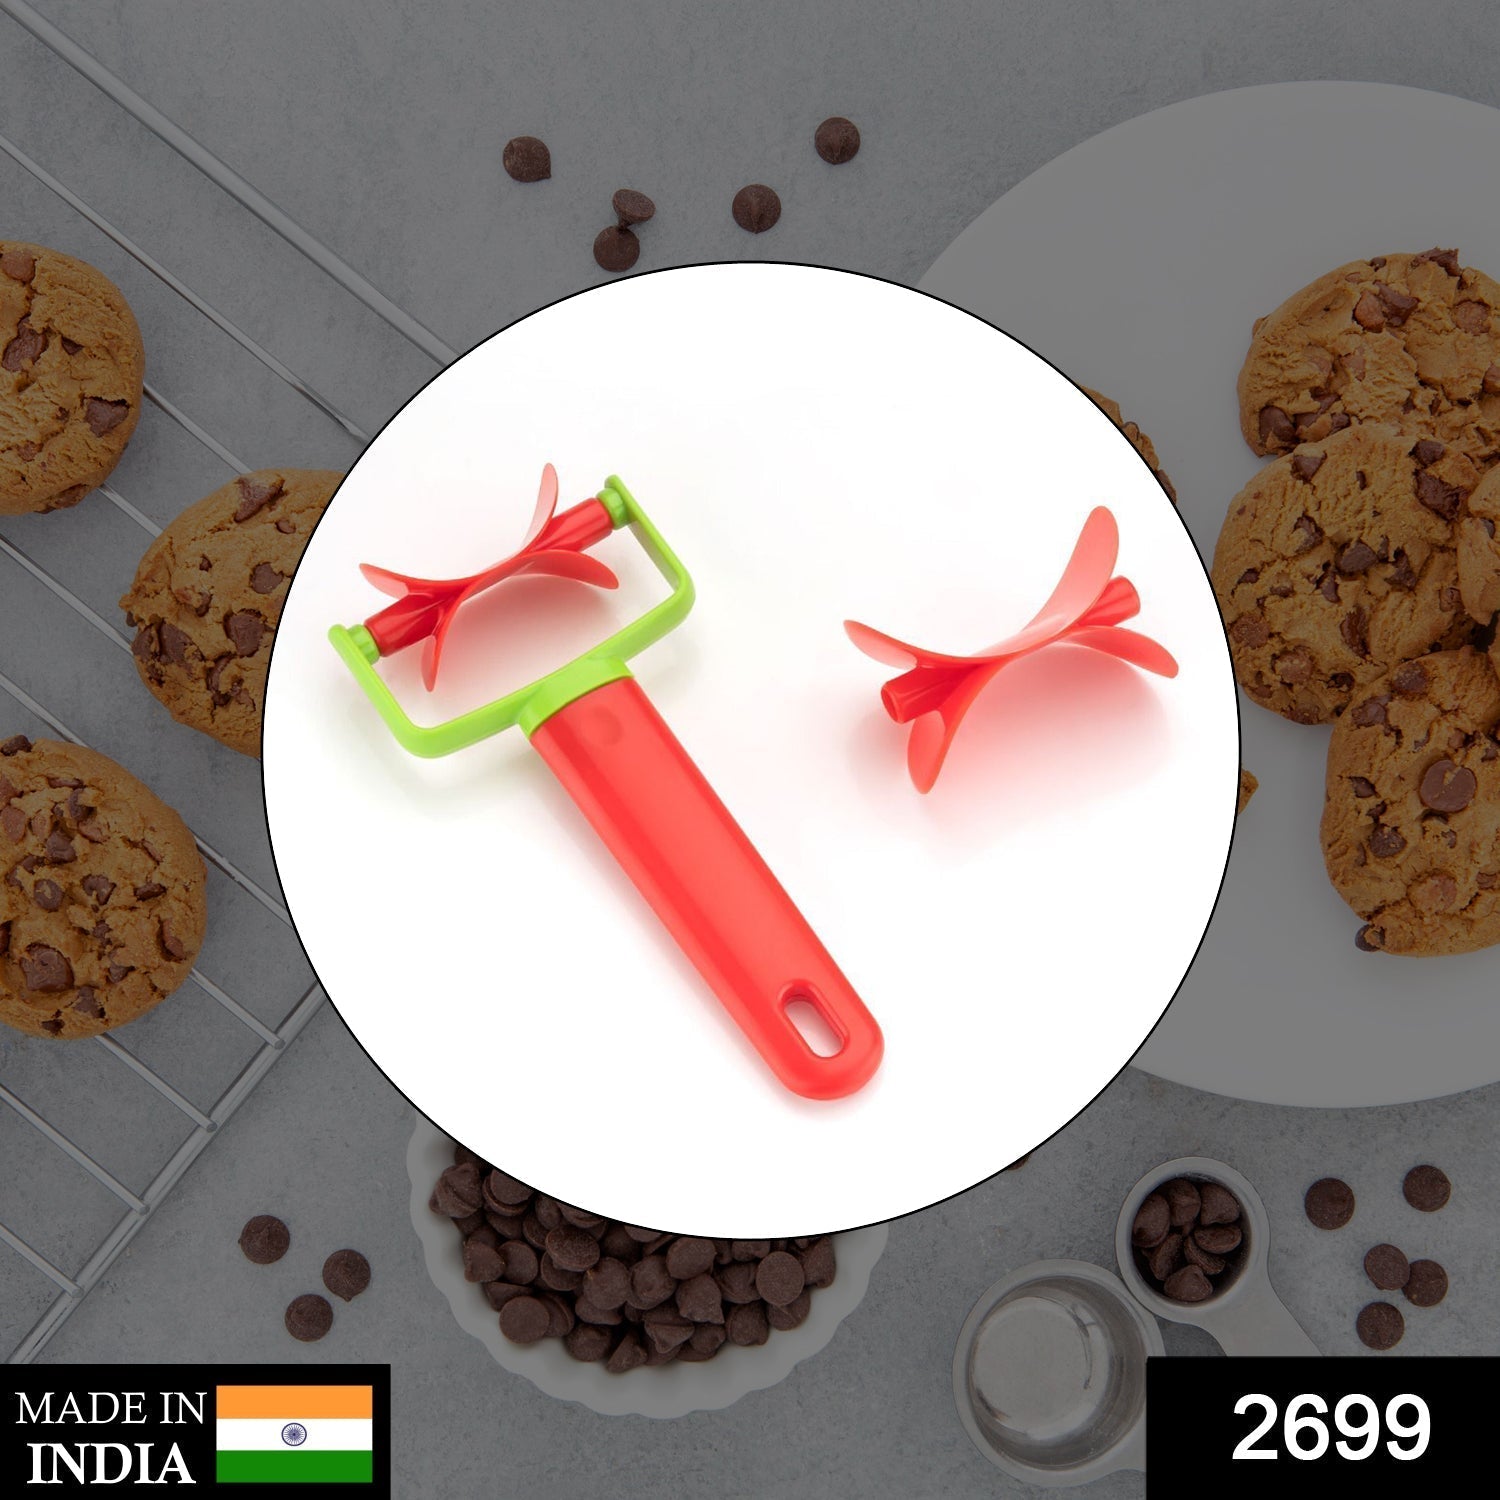 2699 Cookie Rolling Cutter used in all kinds of household and kitchen places for making cookies and stuff. DeoDap